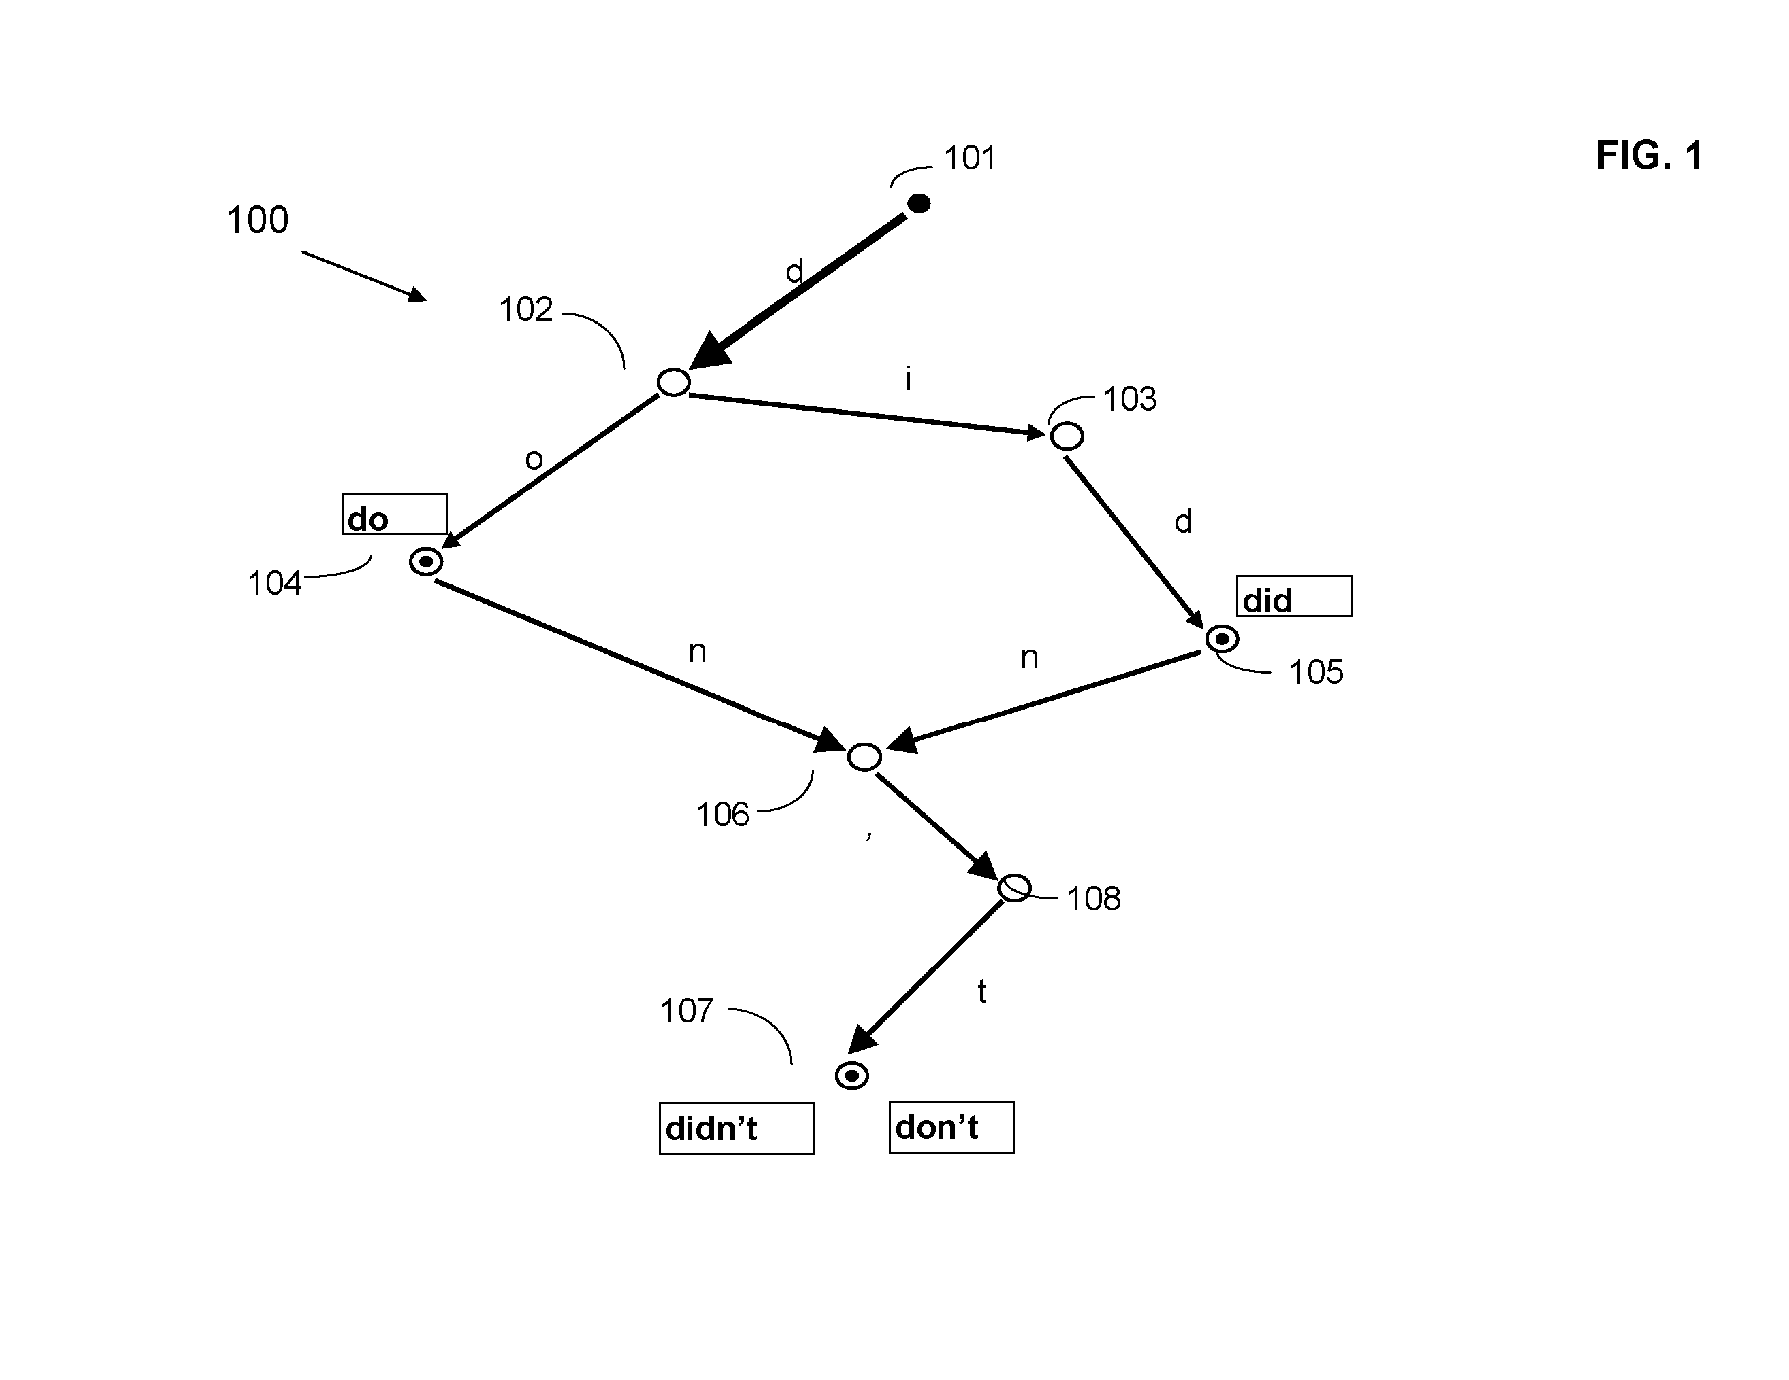 Method and System for Building and Contracting a Linguistic Dictionary